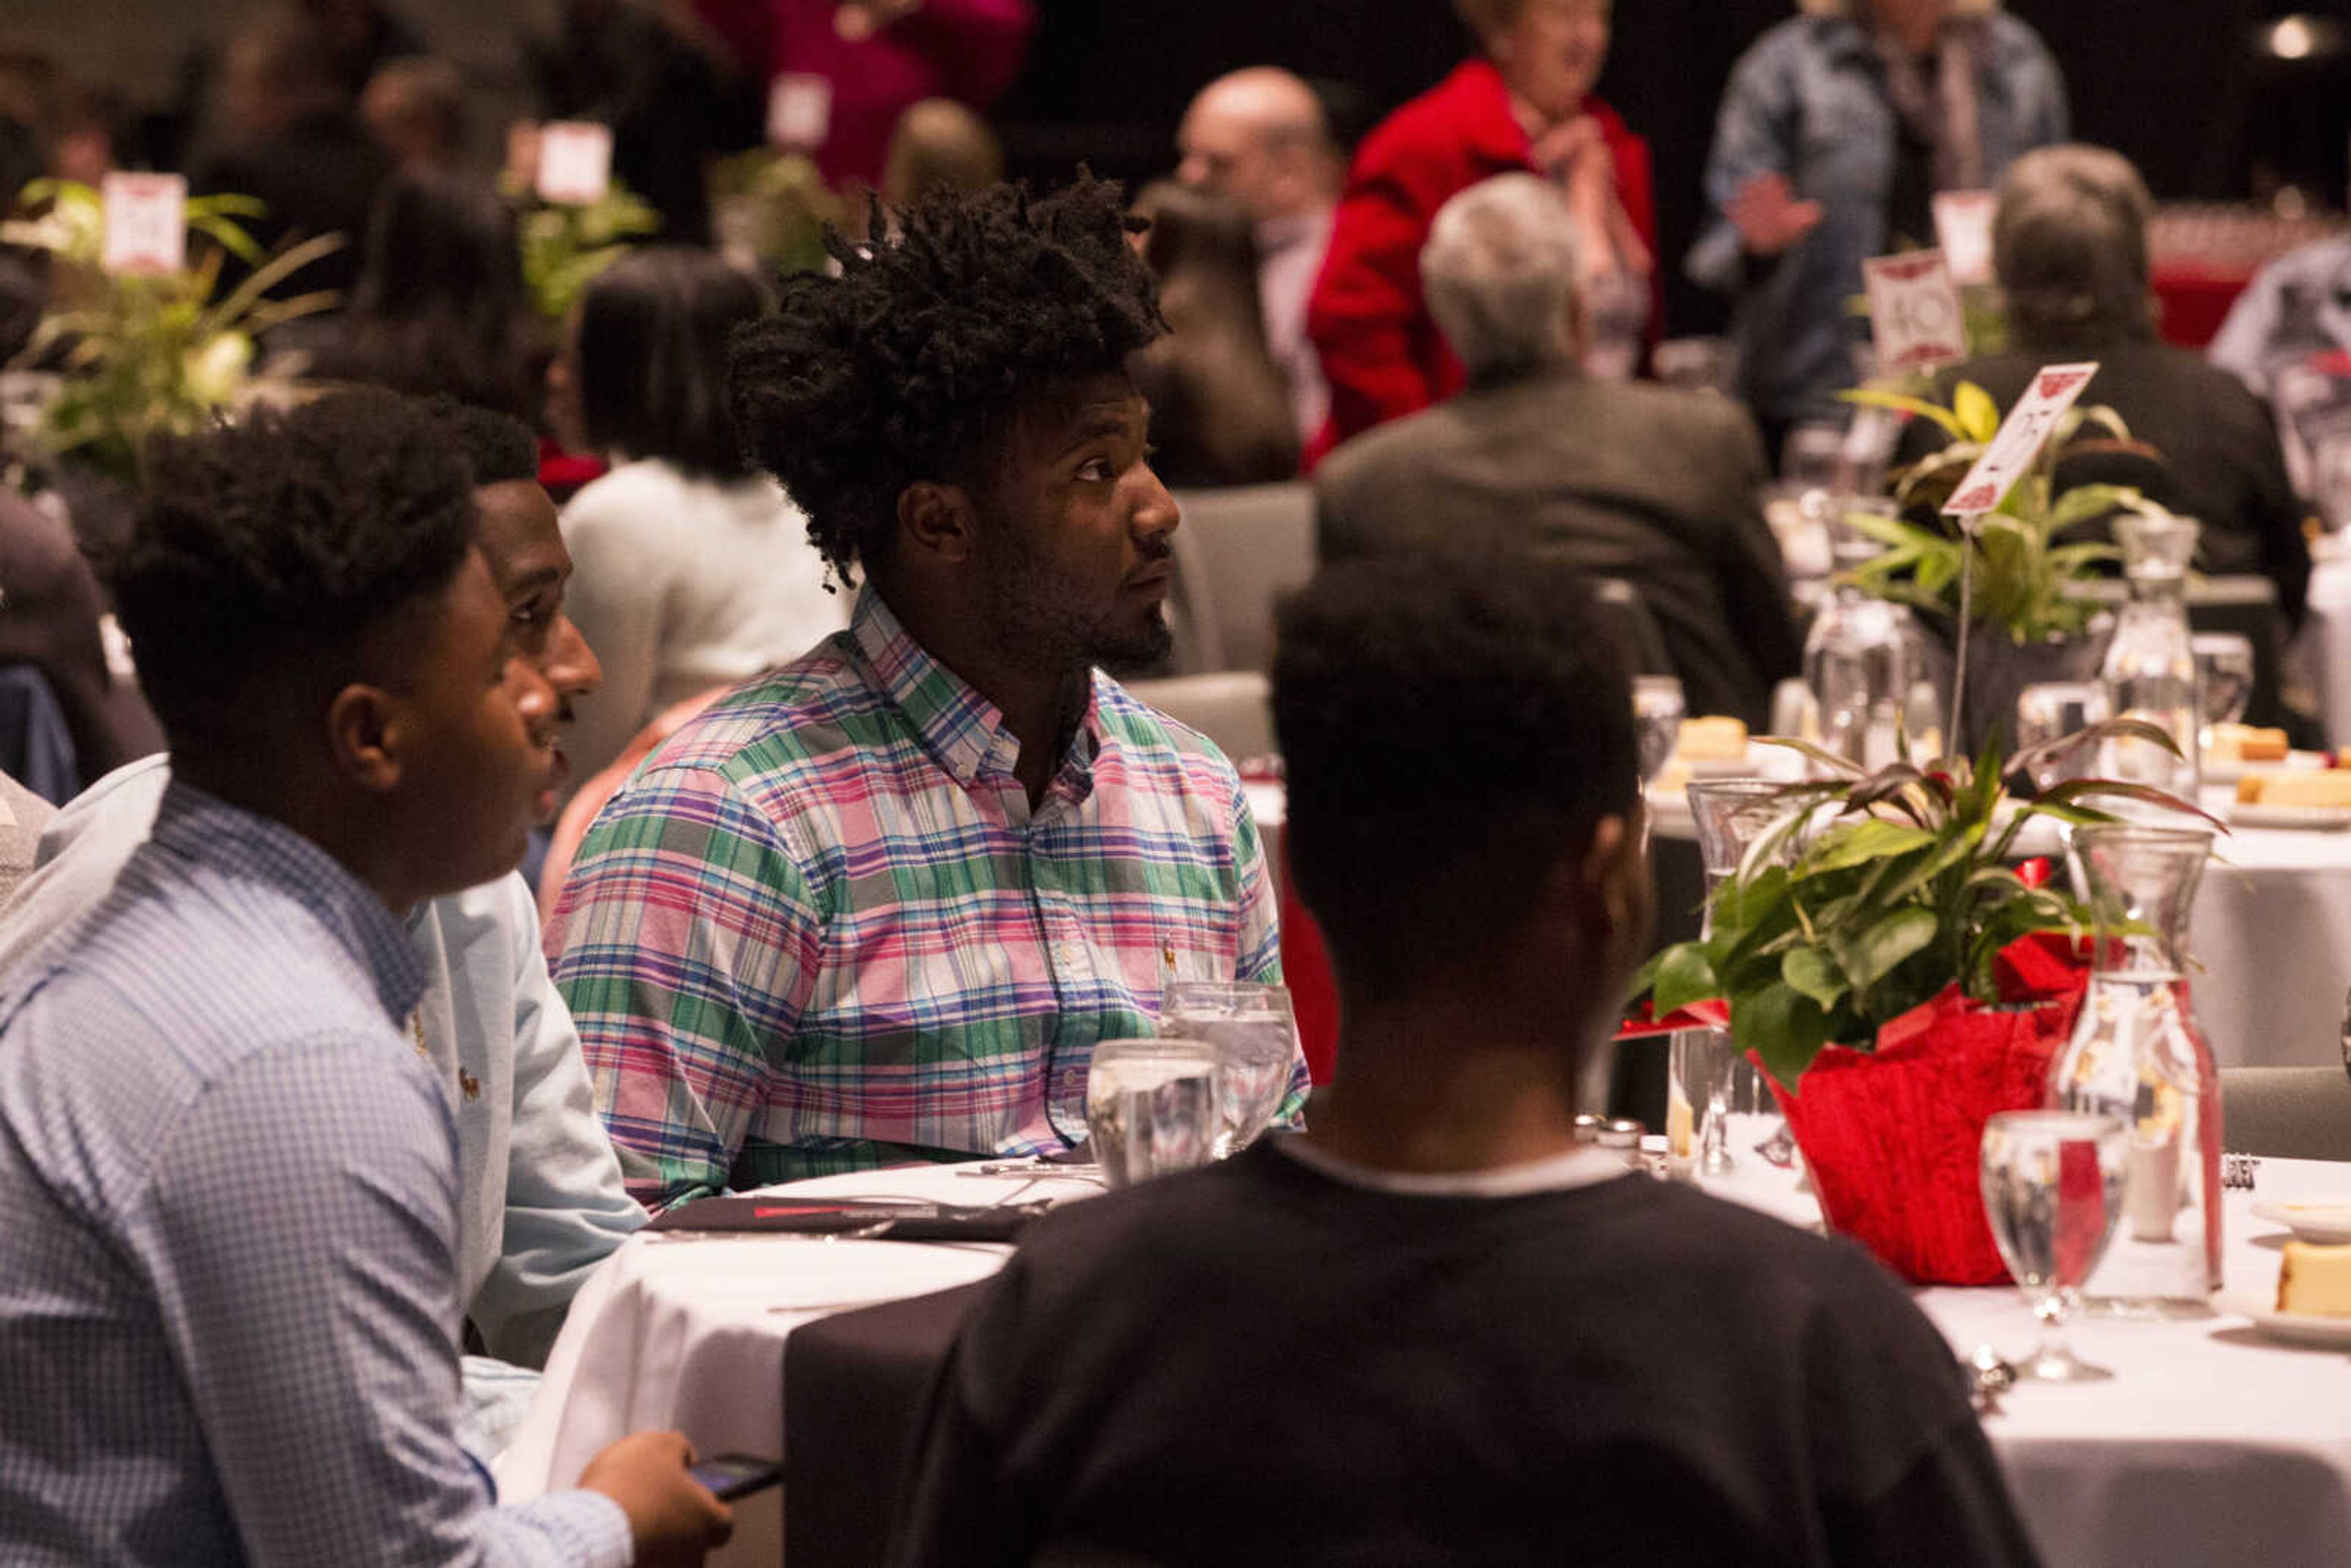 Attendees of the Jan. 17, 2018 Martin Luther King Jr. Celebration Dinner at 7 p.m. sit together.